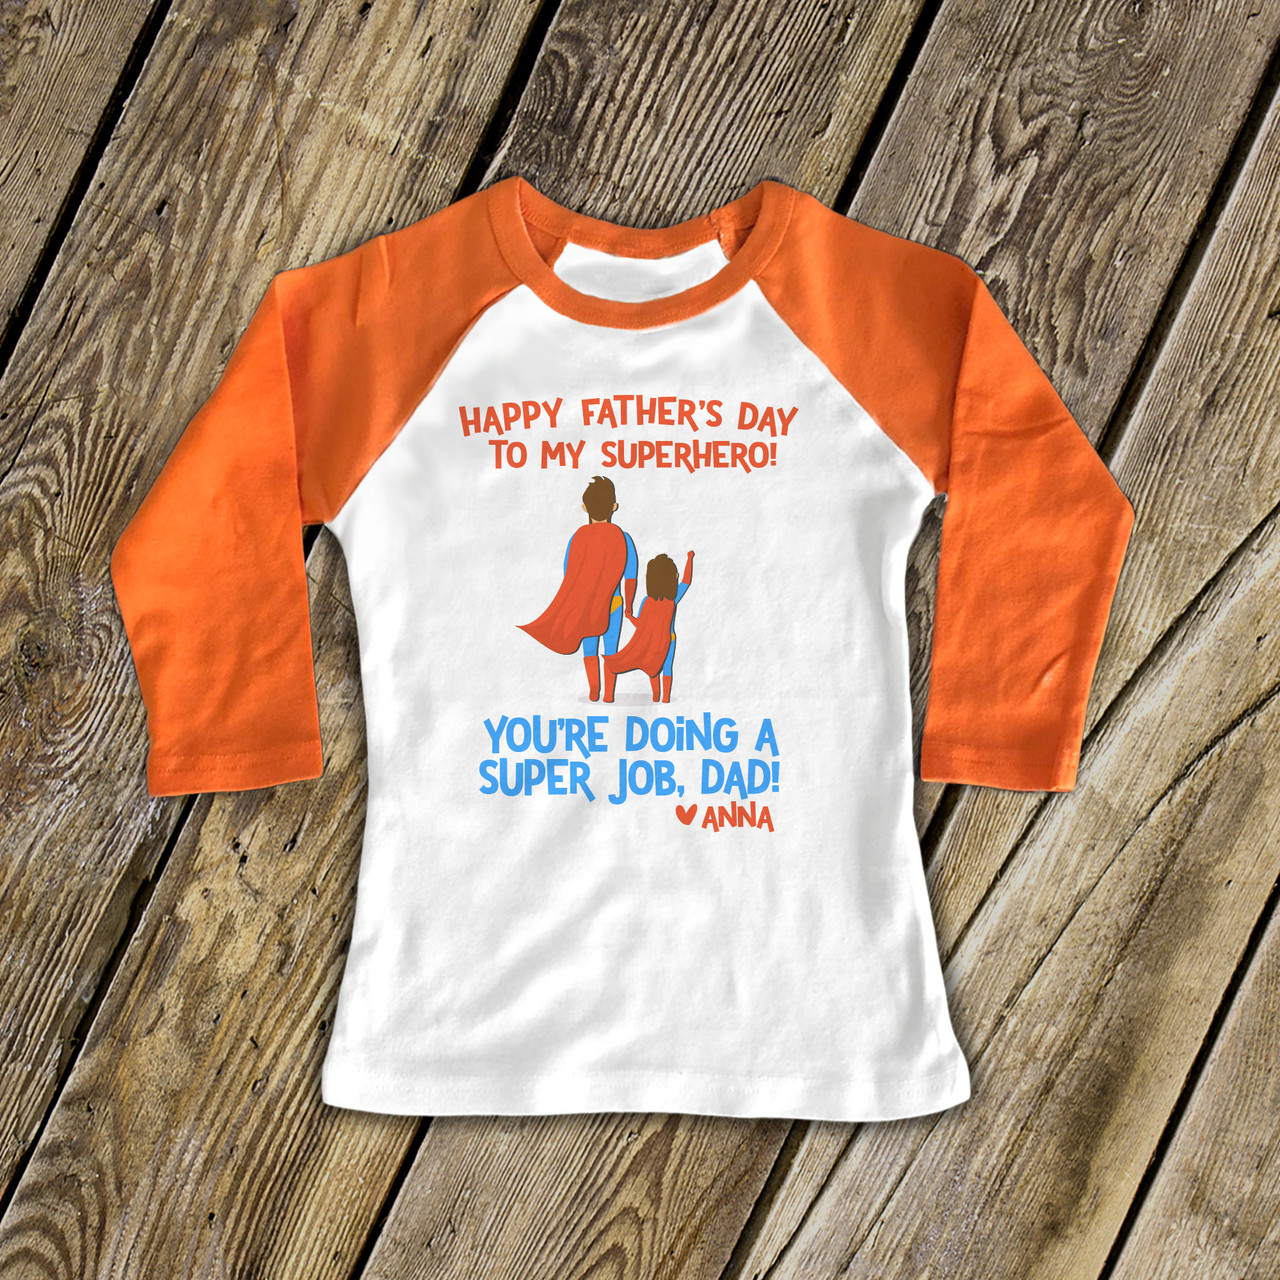 Father's Day 2023 - Personalized Dad's Garage Shirt, Custom Grandpa Little  Helpers Shirt, Best Dad Shirt, Cool Dad Shirt, Gift For Daddy Father 30571